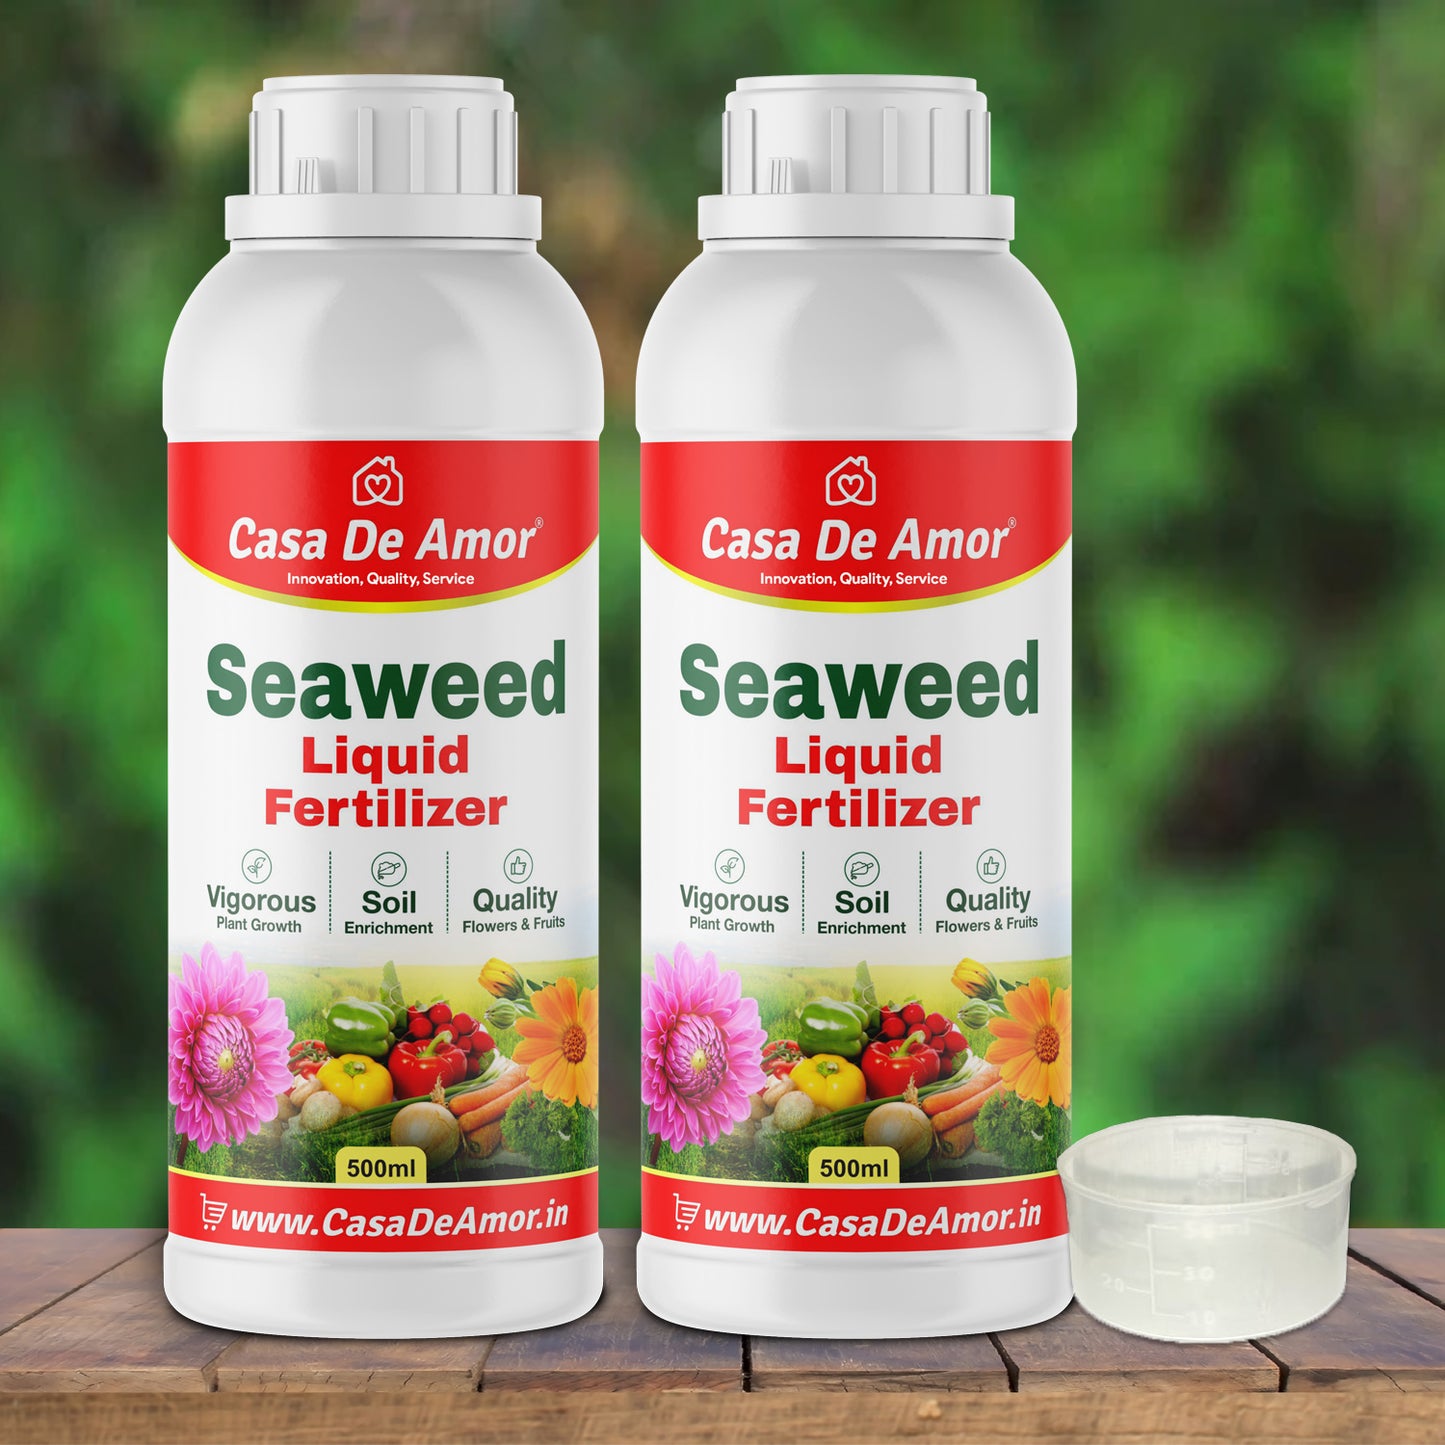 Casa De Amor Liquid Fertilizer Seaweed Extract for spray and drenching for Indoor and outdoor Plants